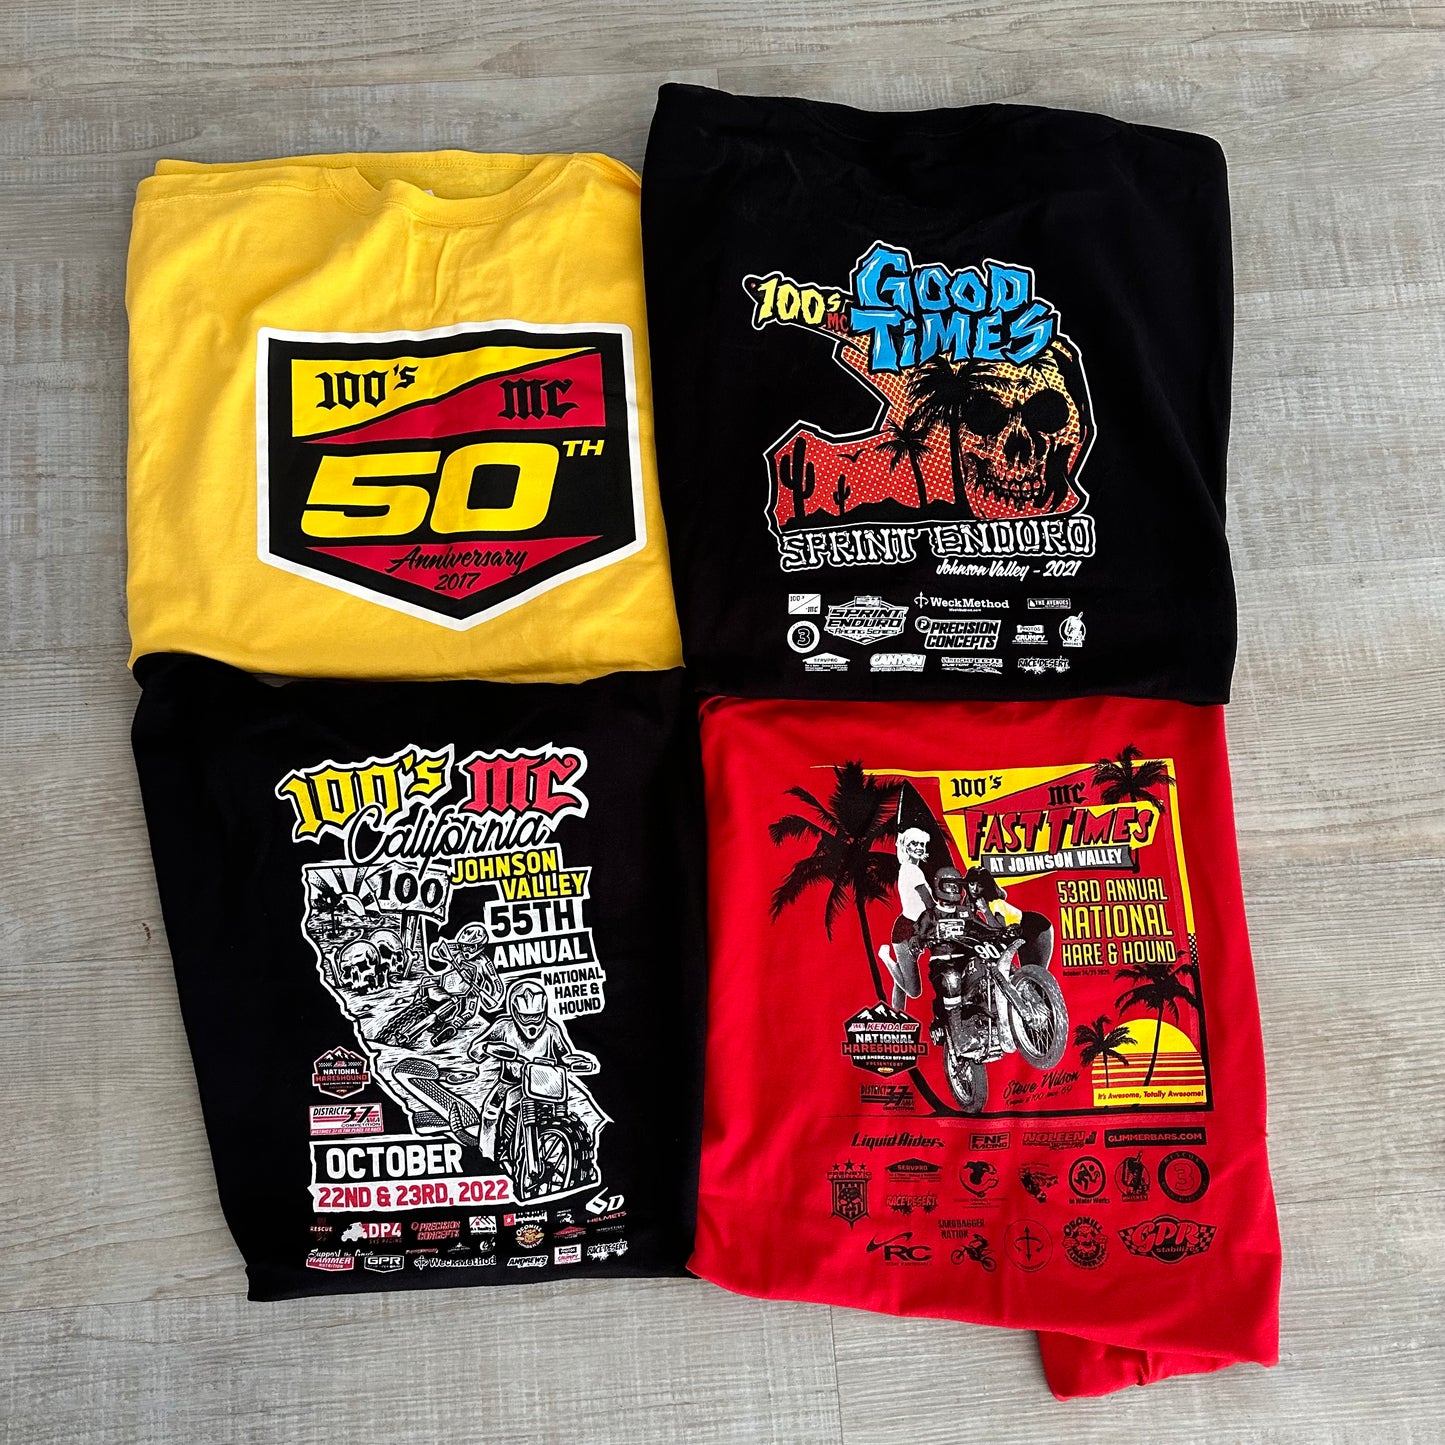 Adult 3XL - 4 Pack - 100's Club Apparel & Event Shirts